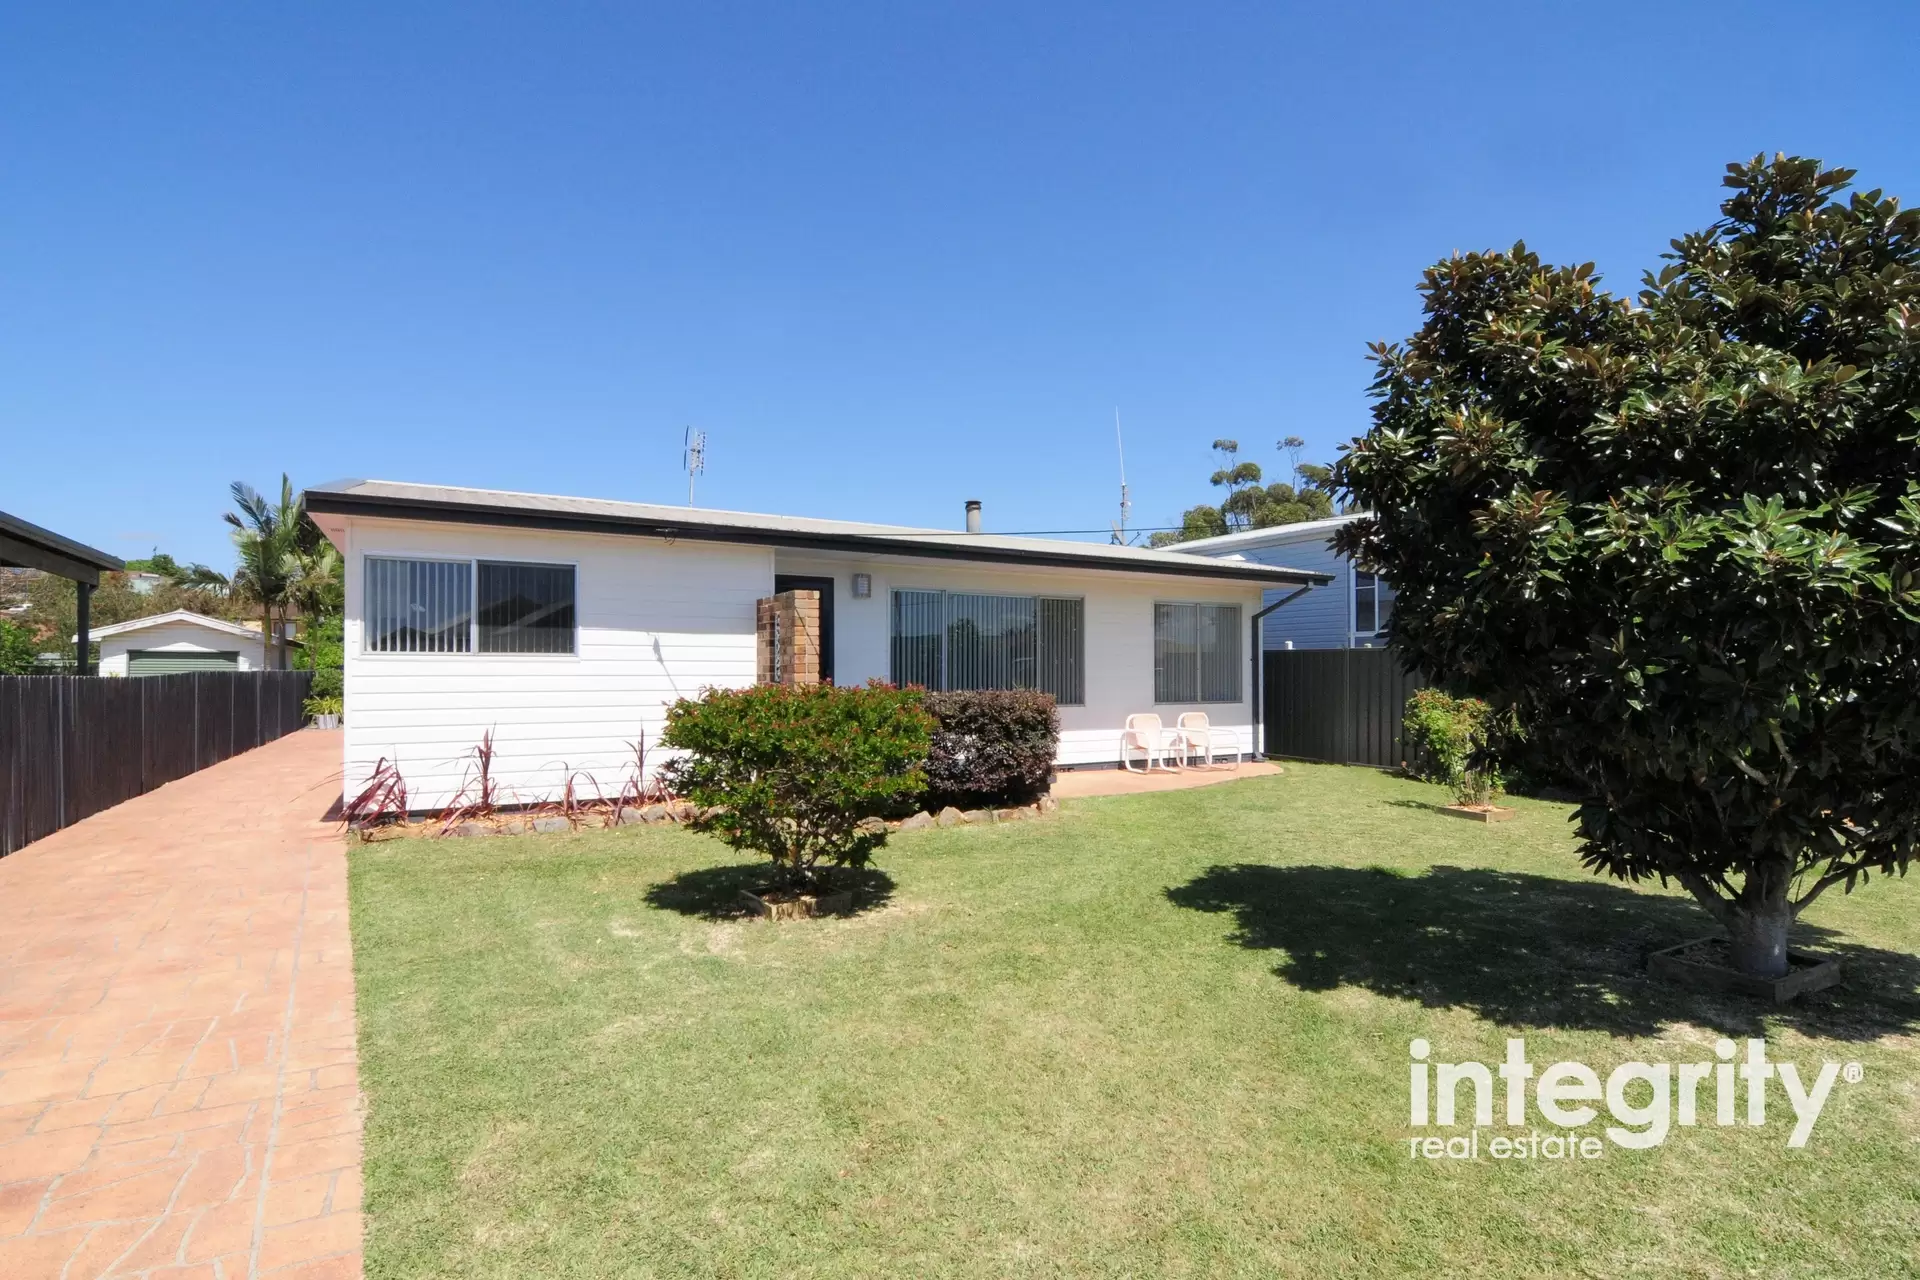 42 Adelaide Street, Greenwell Point Leased by Integrity Real Estate - image 1